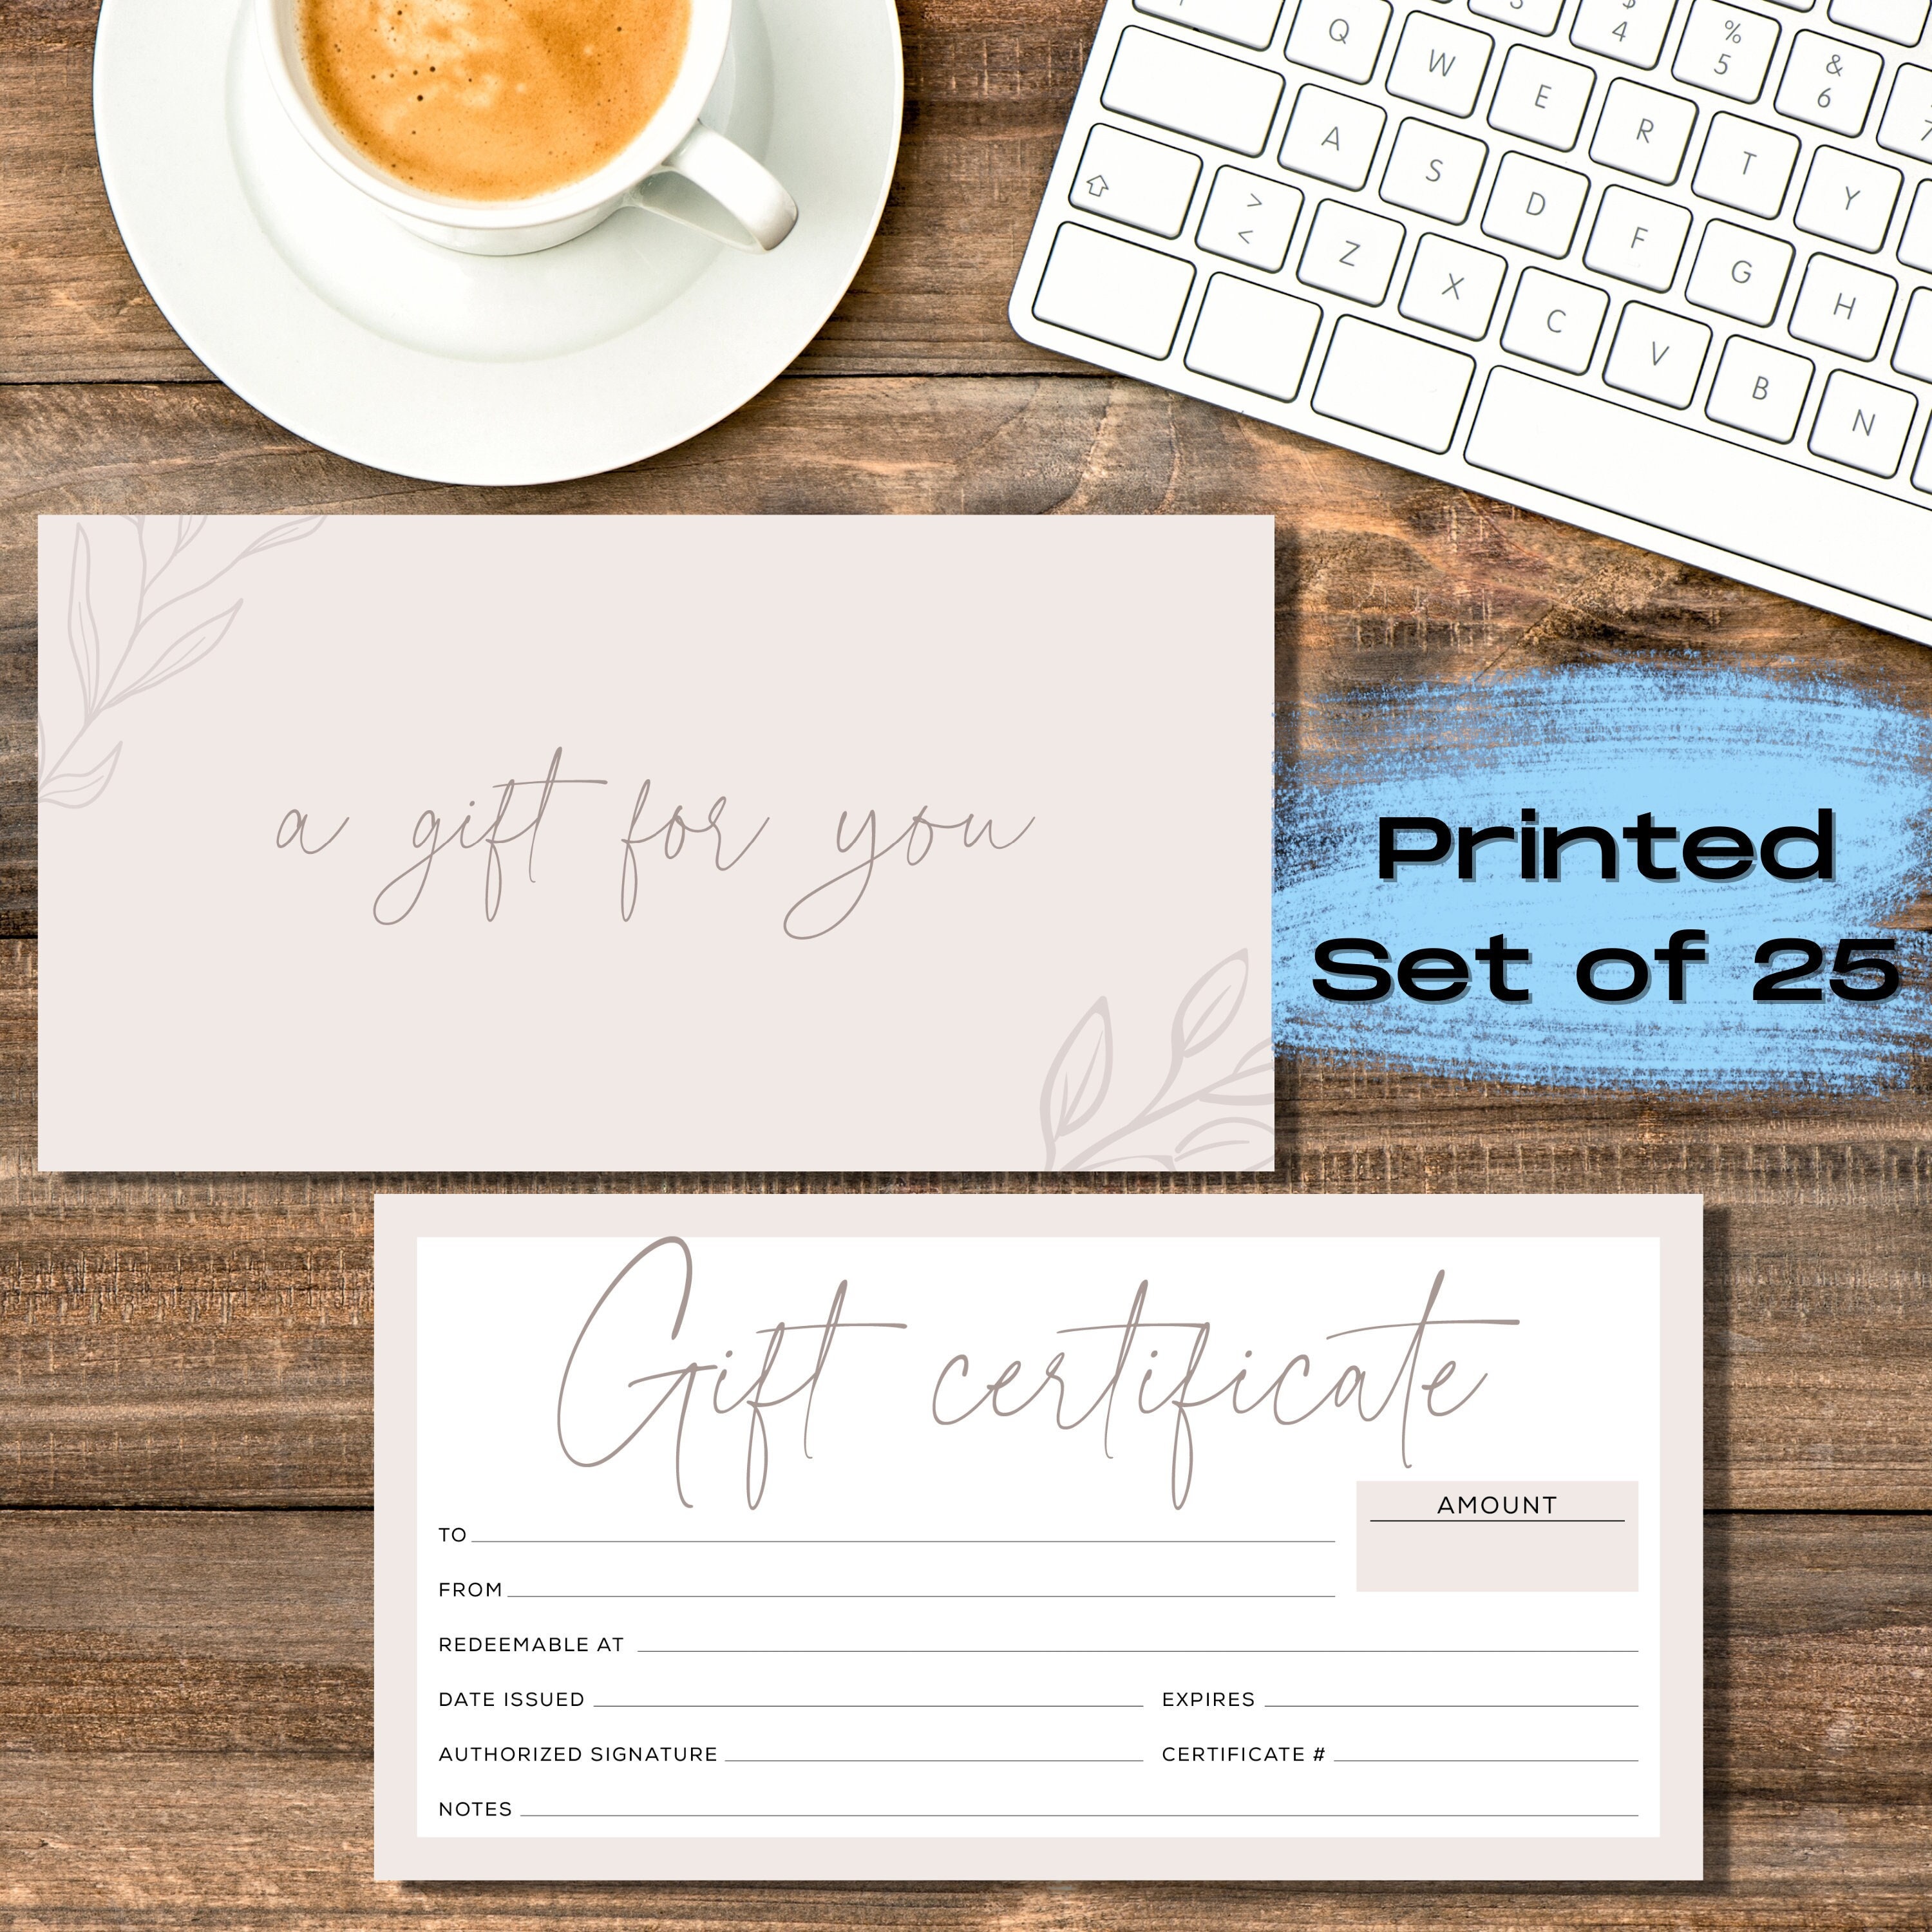 25 Blank Gift Certificate Vouchers for Small Business 3.75x7.5